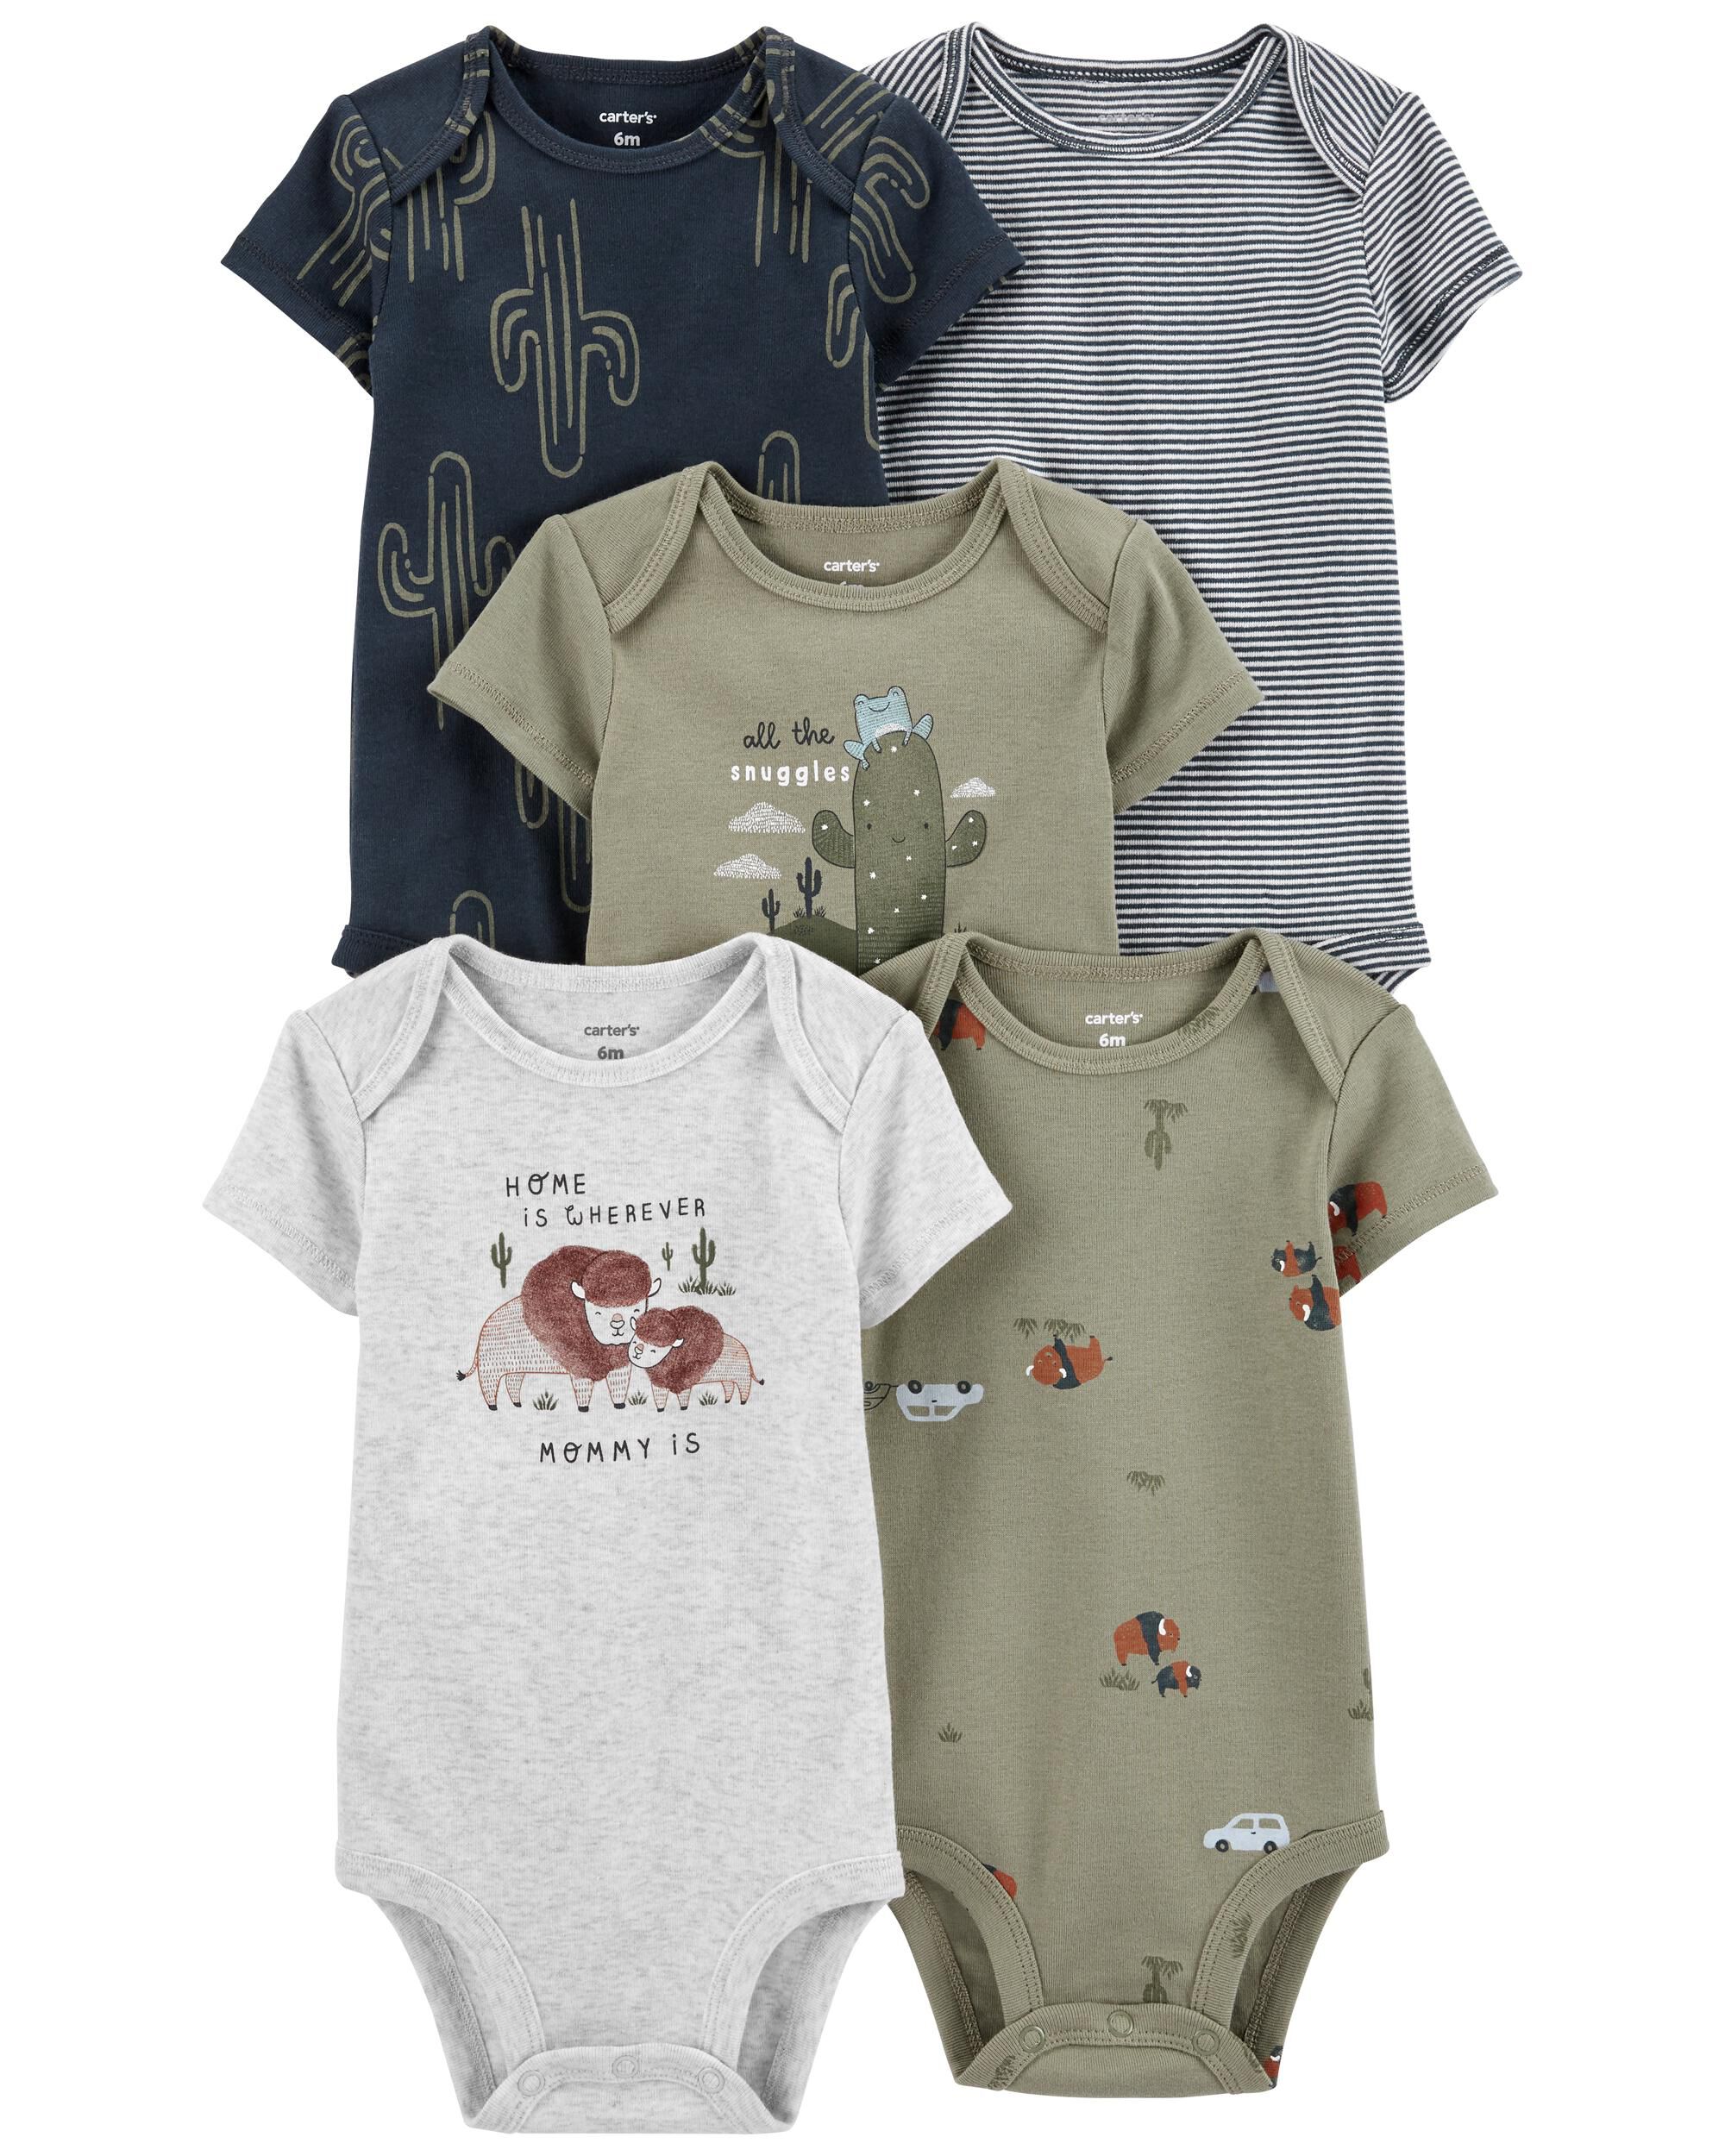 Carters Unisex Baby 5-Pack Shirts 